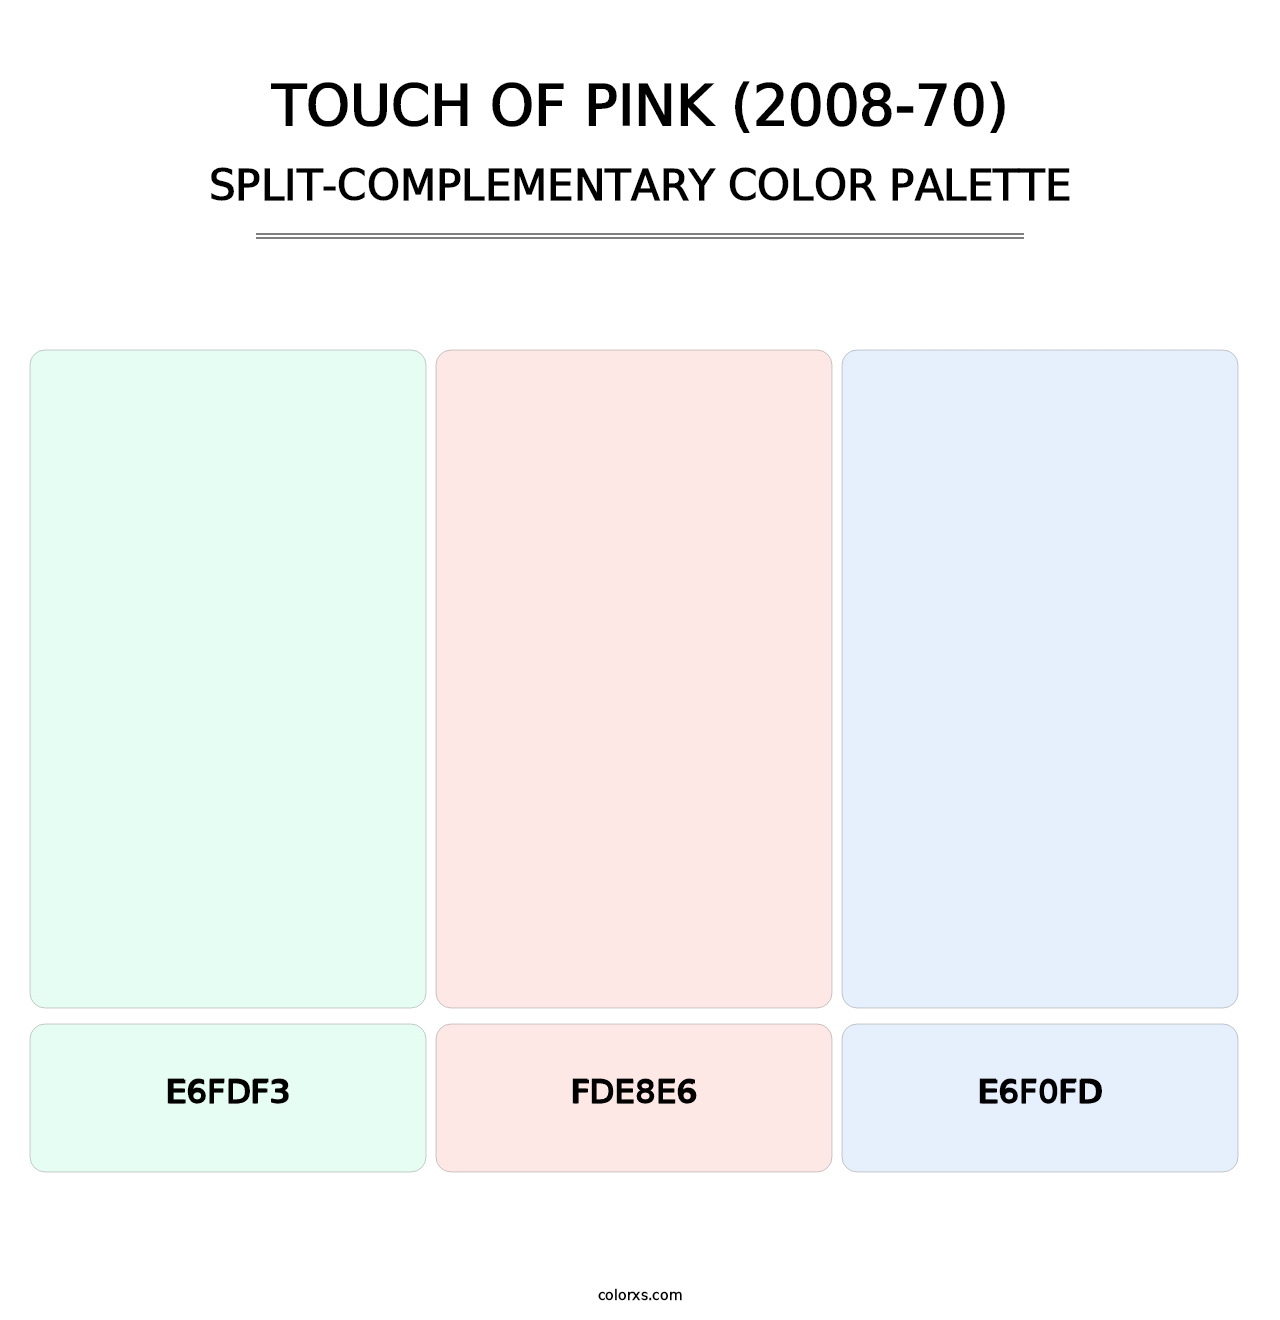 Touch of Pink (2008-70) - Split-Complementary Color Palette